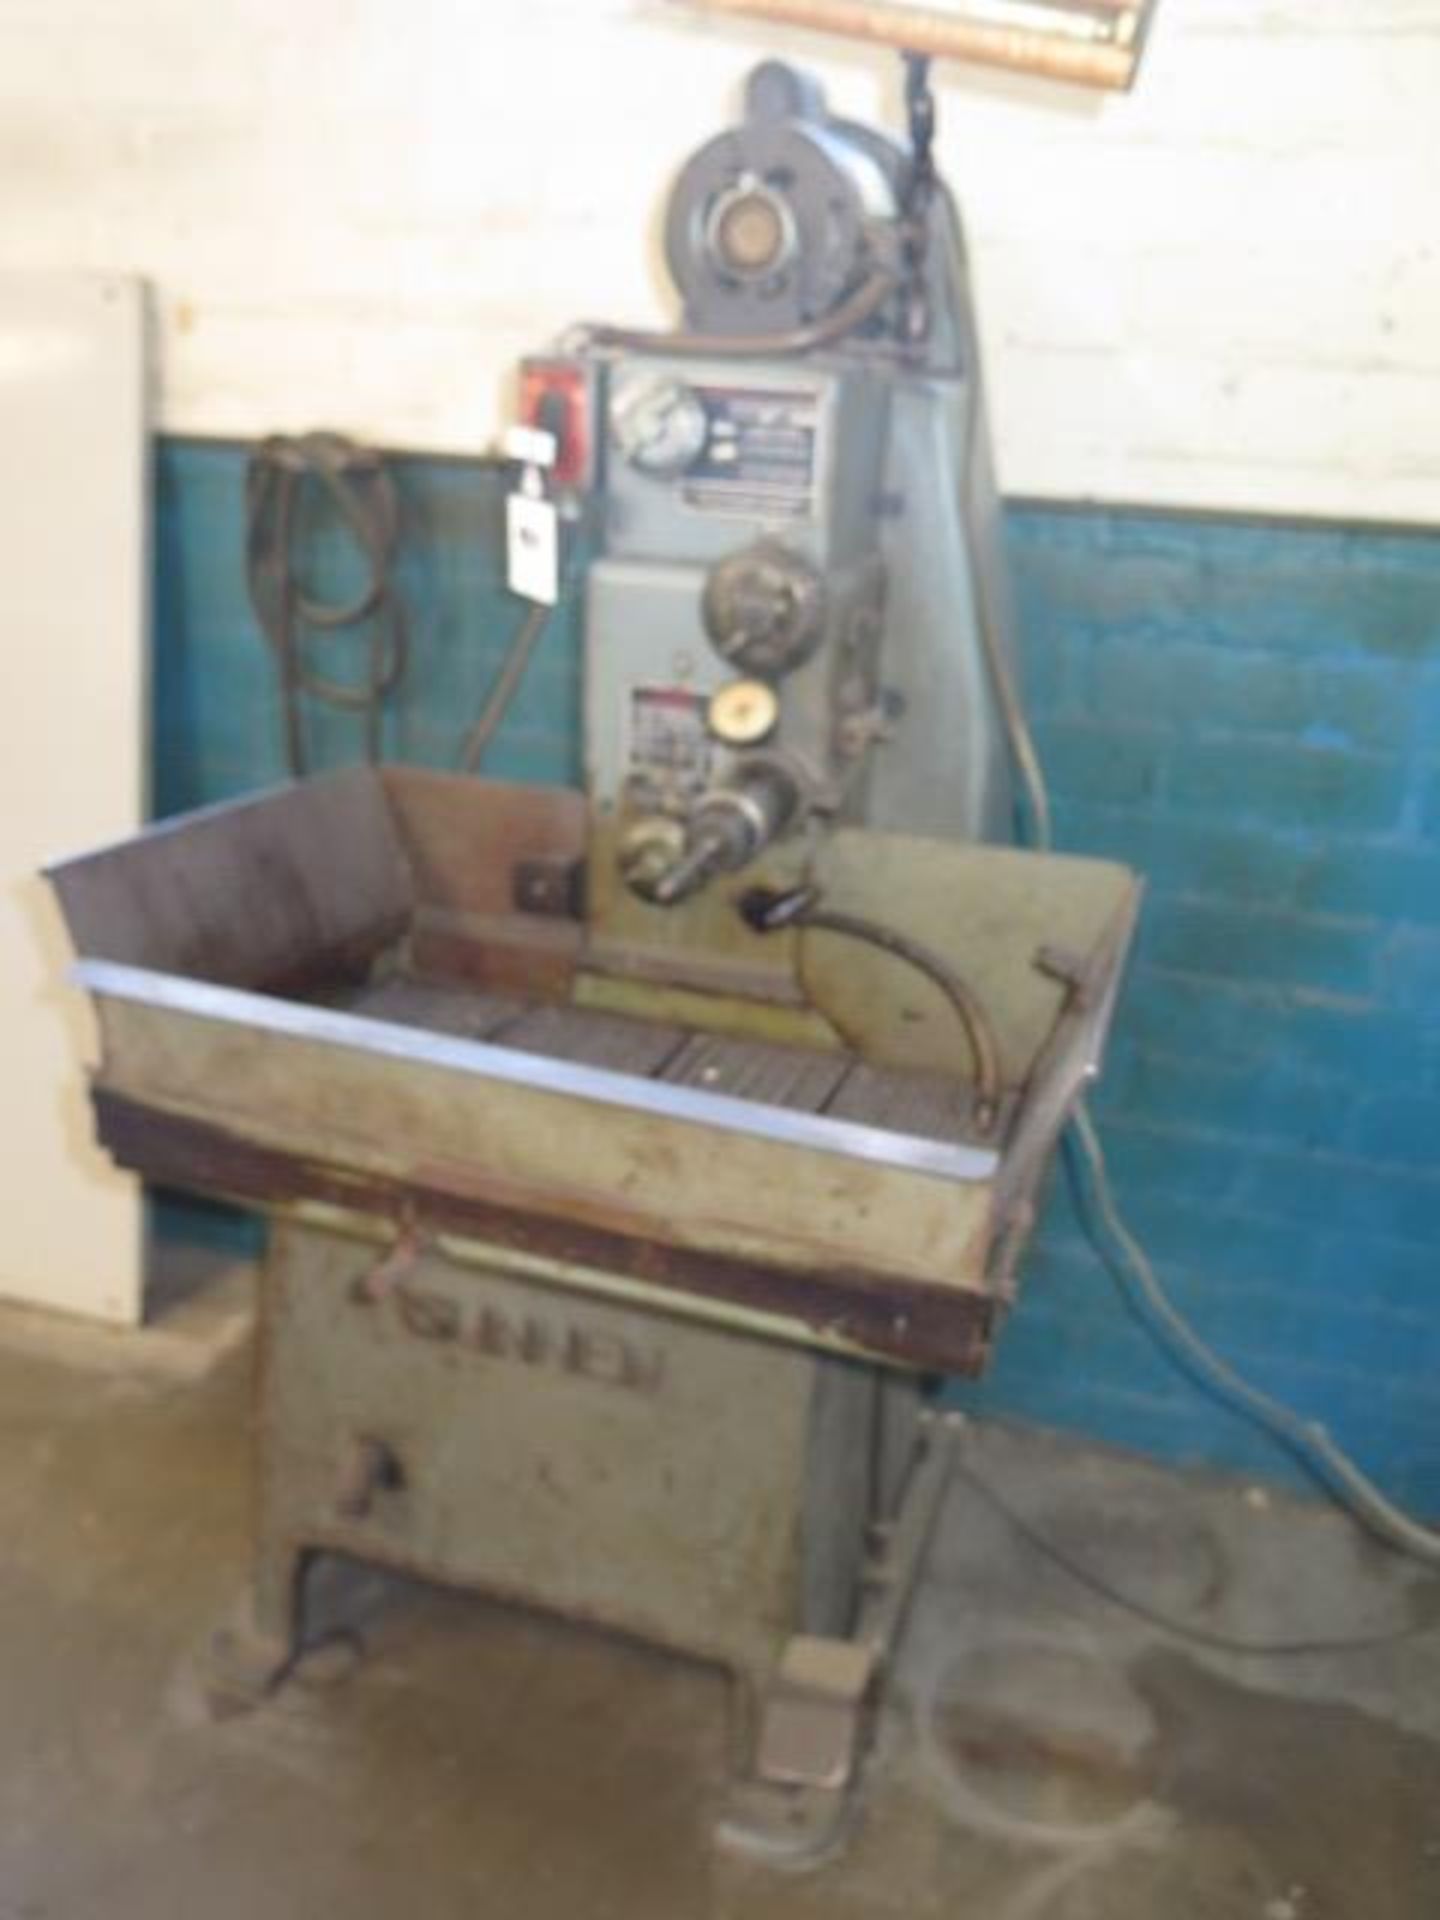 Sunnen MBB-1600 Precision Honing Machine s/n 43802 w/ Coolant (SOLD AS-IS - NO WARRANTY) - Image 2 of 8